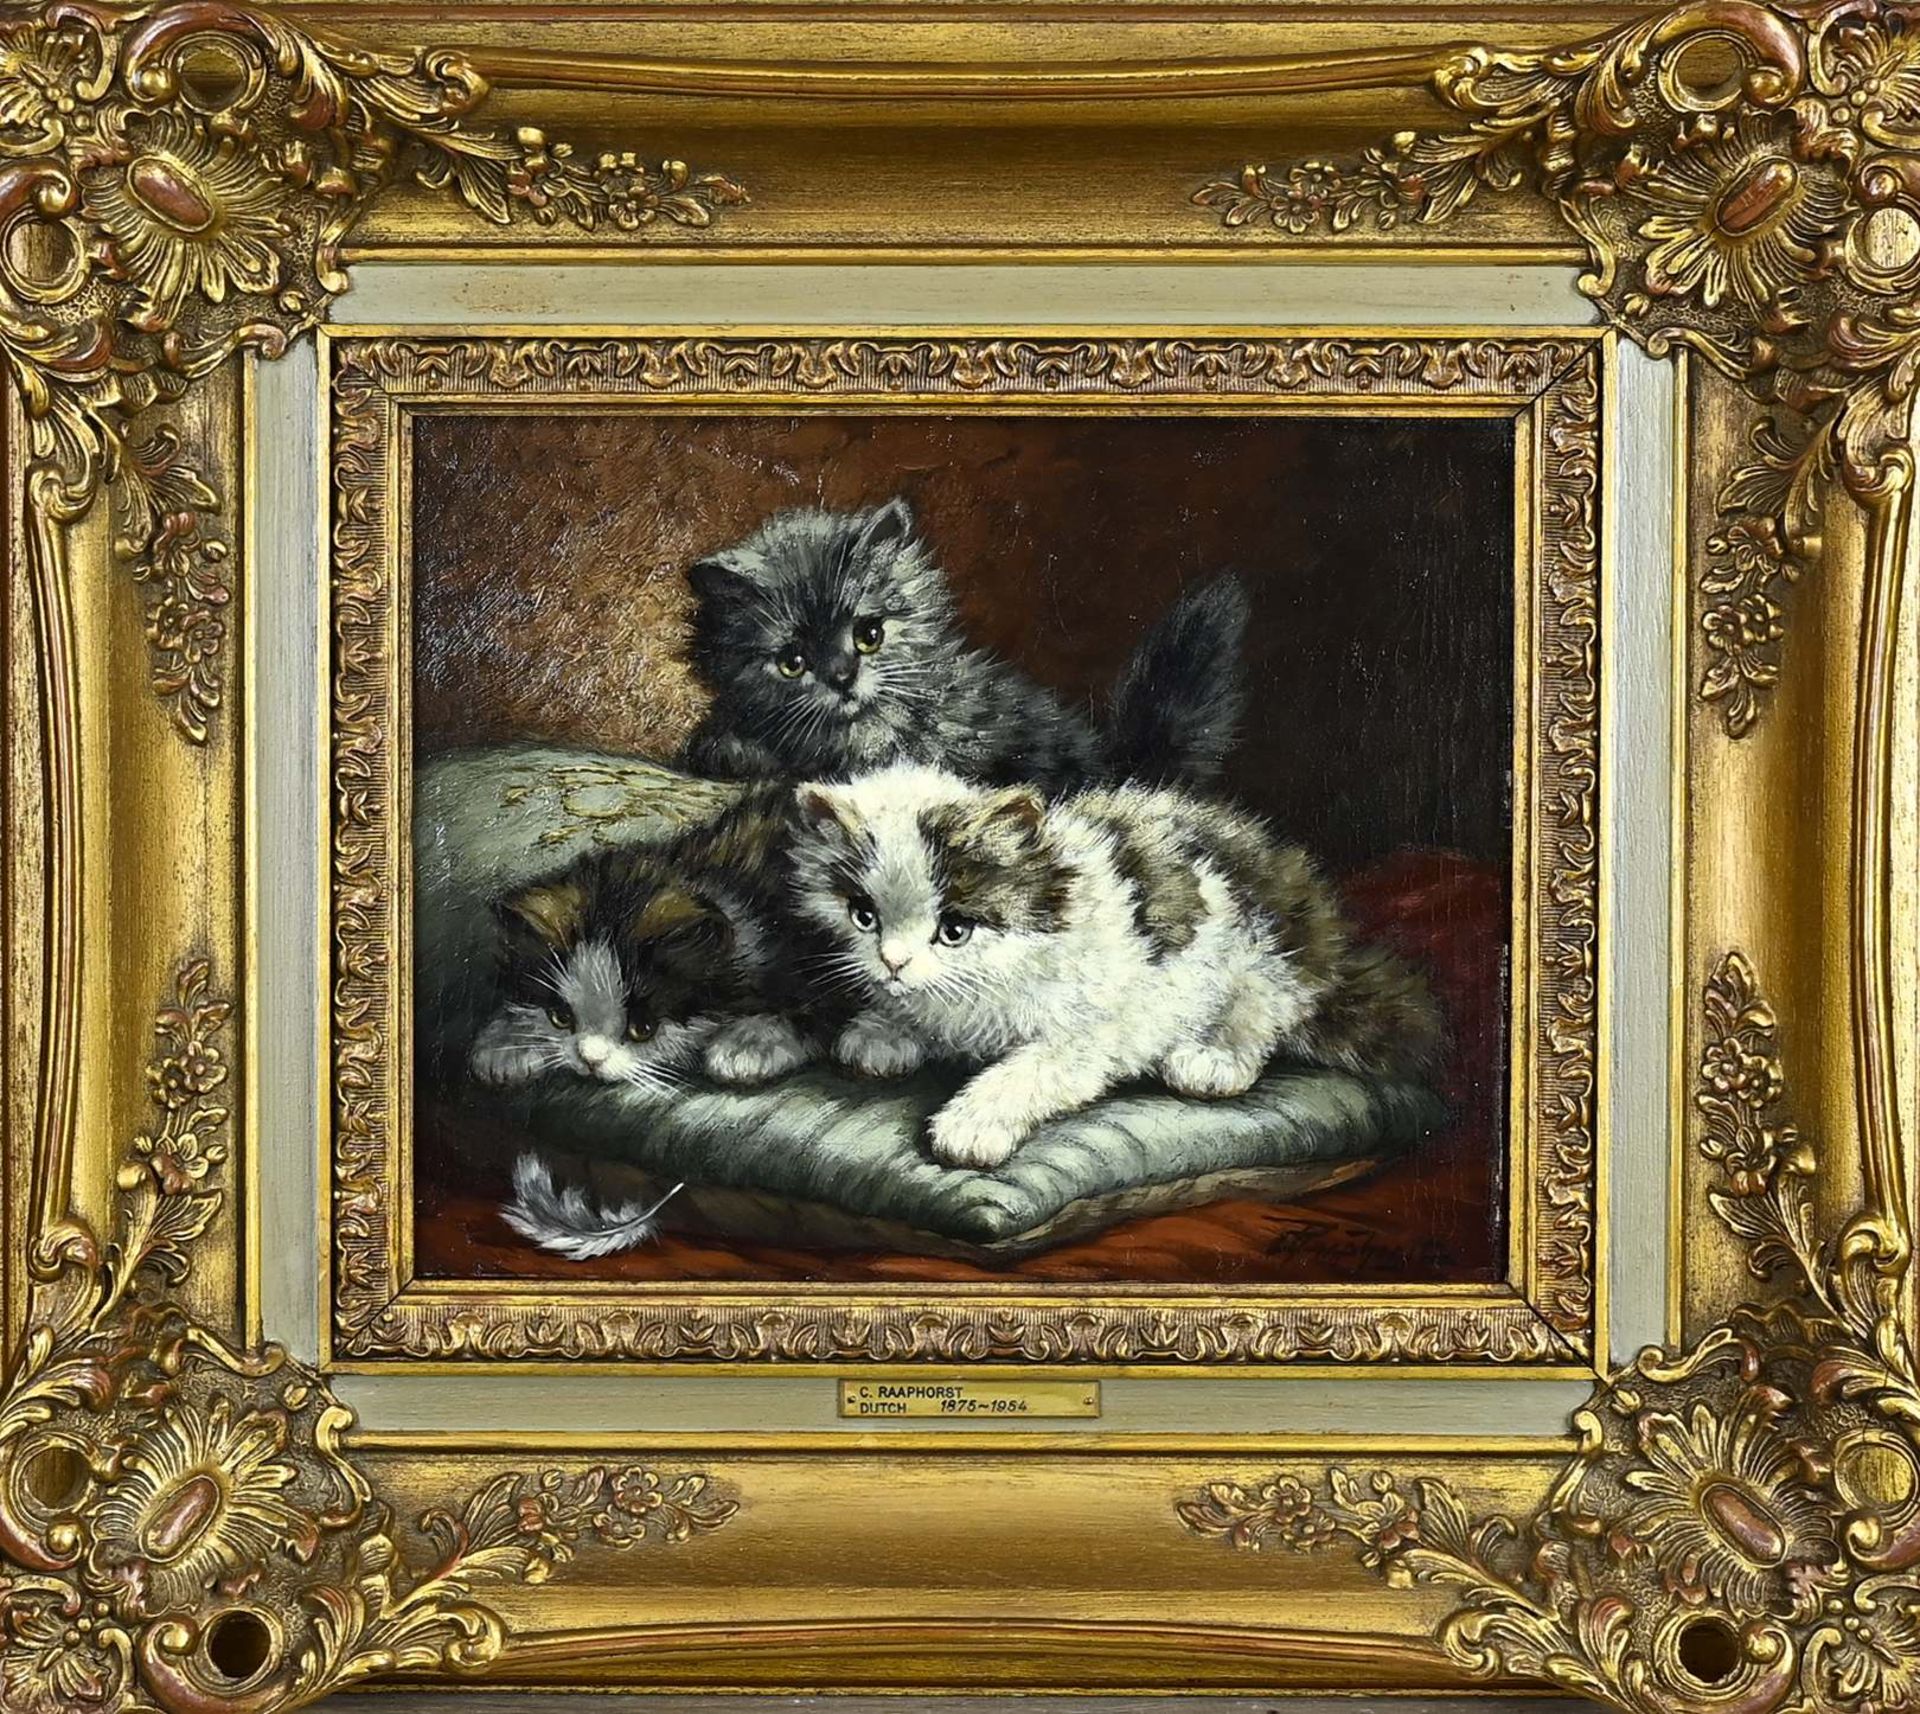 C. Raaphorst, Three kittens with a feather